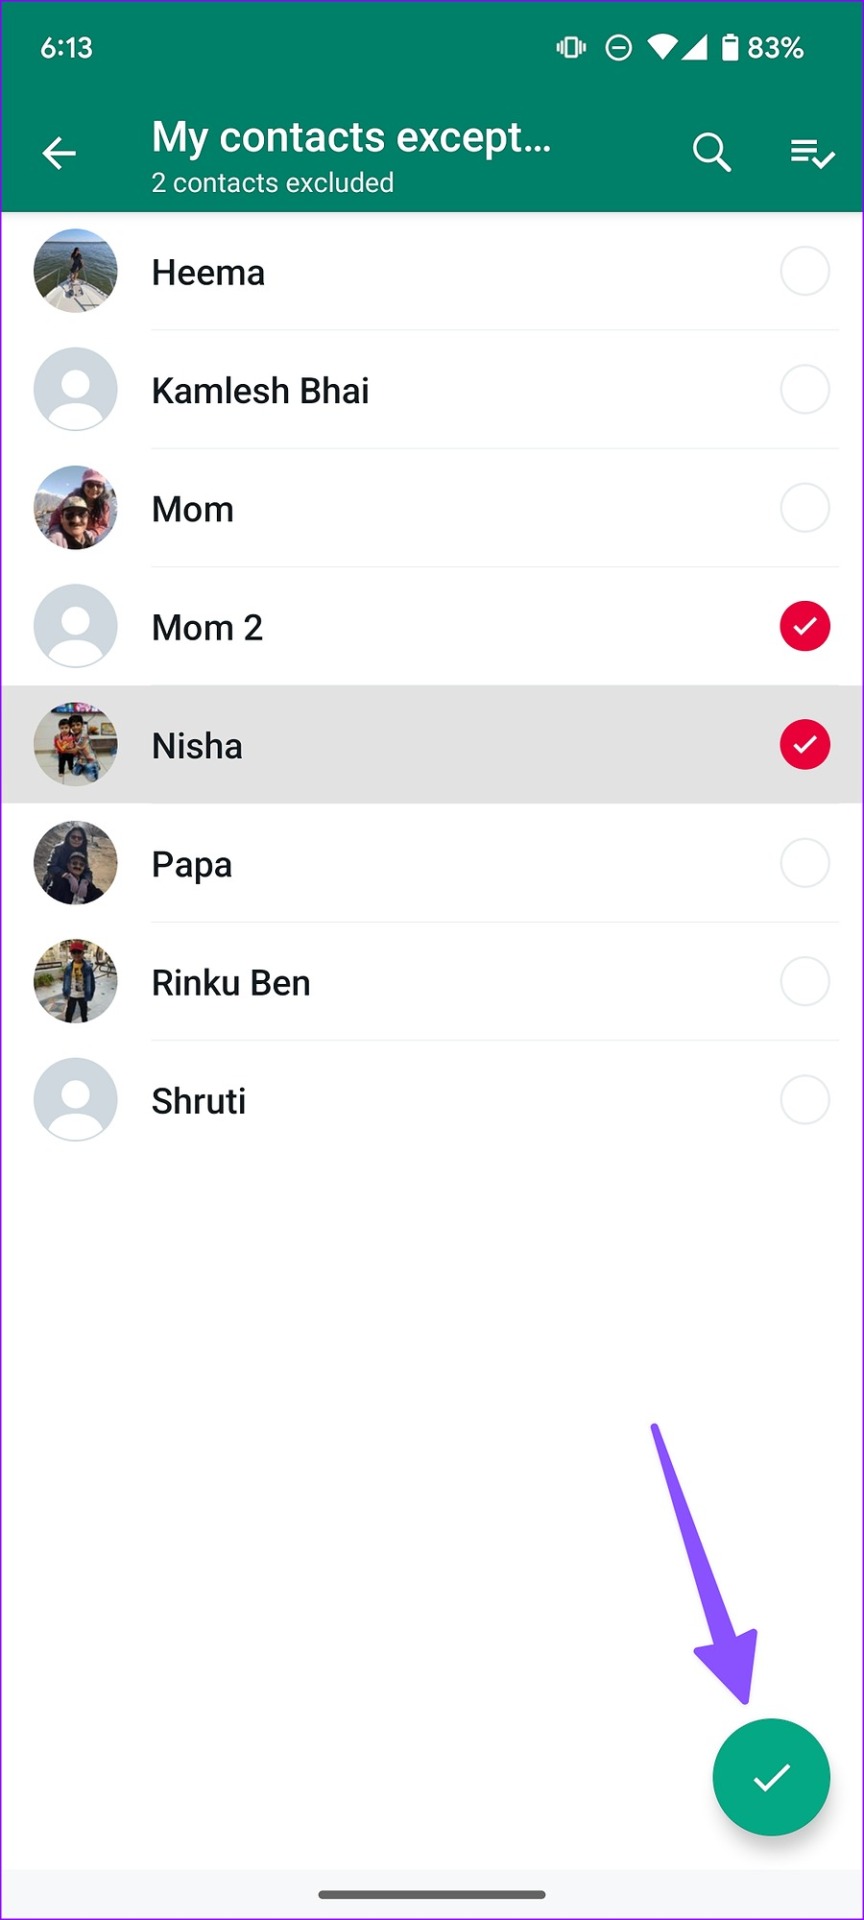 select contacts to hide online status from